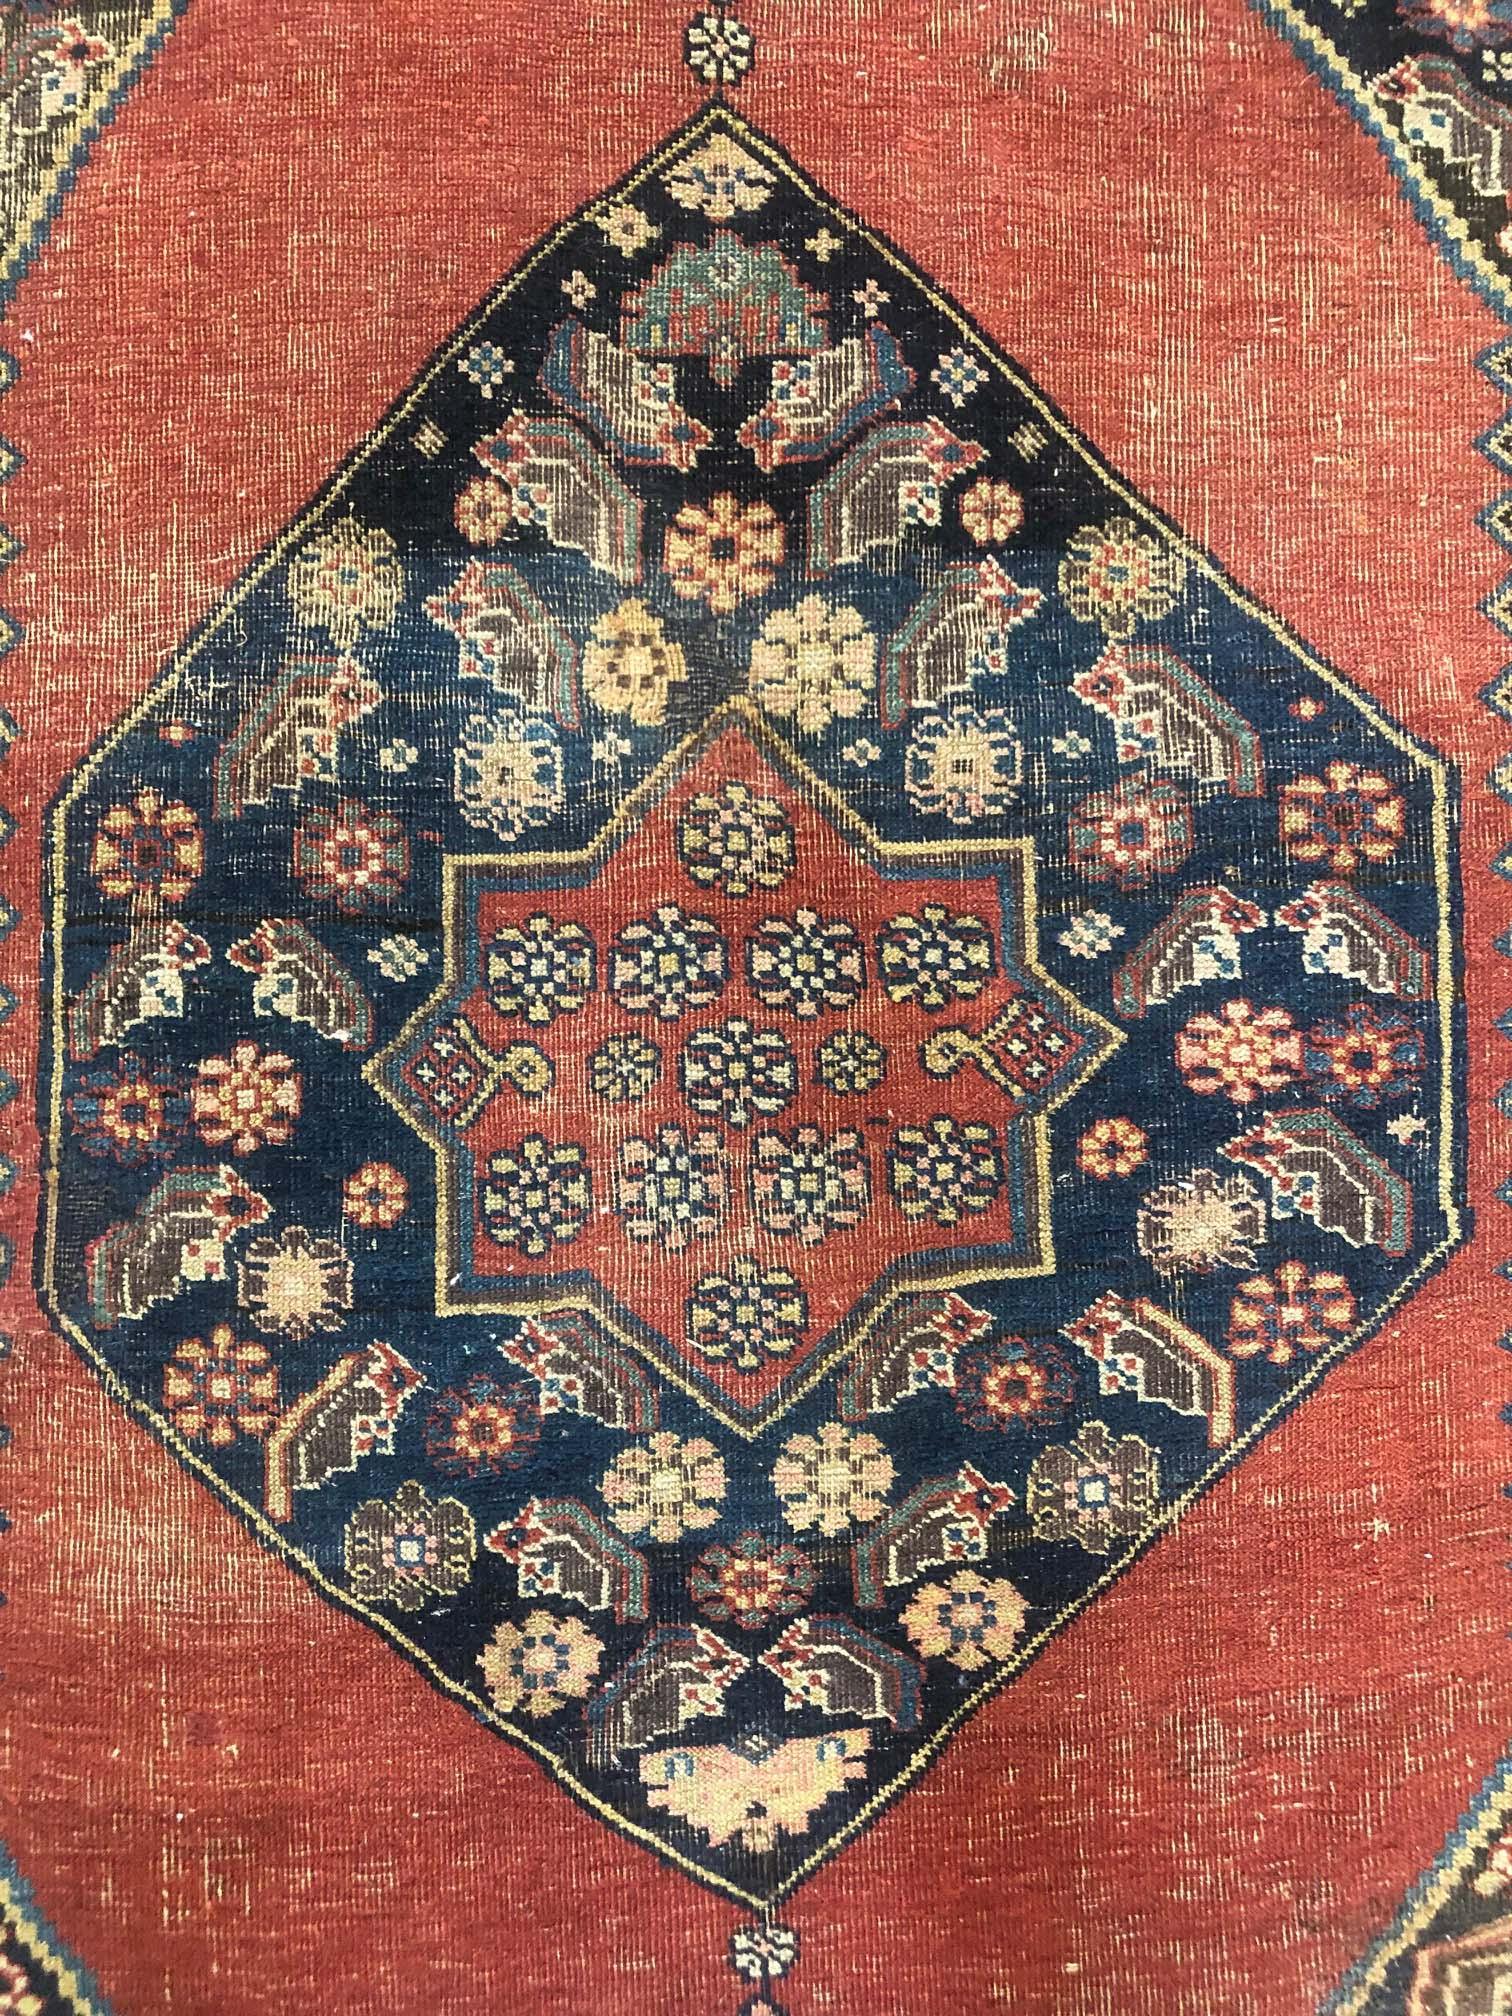 Late 19th Century Authentic Persian Hand Knotted Antique Bijar Rug, circa 1880